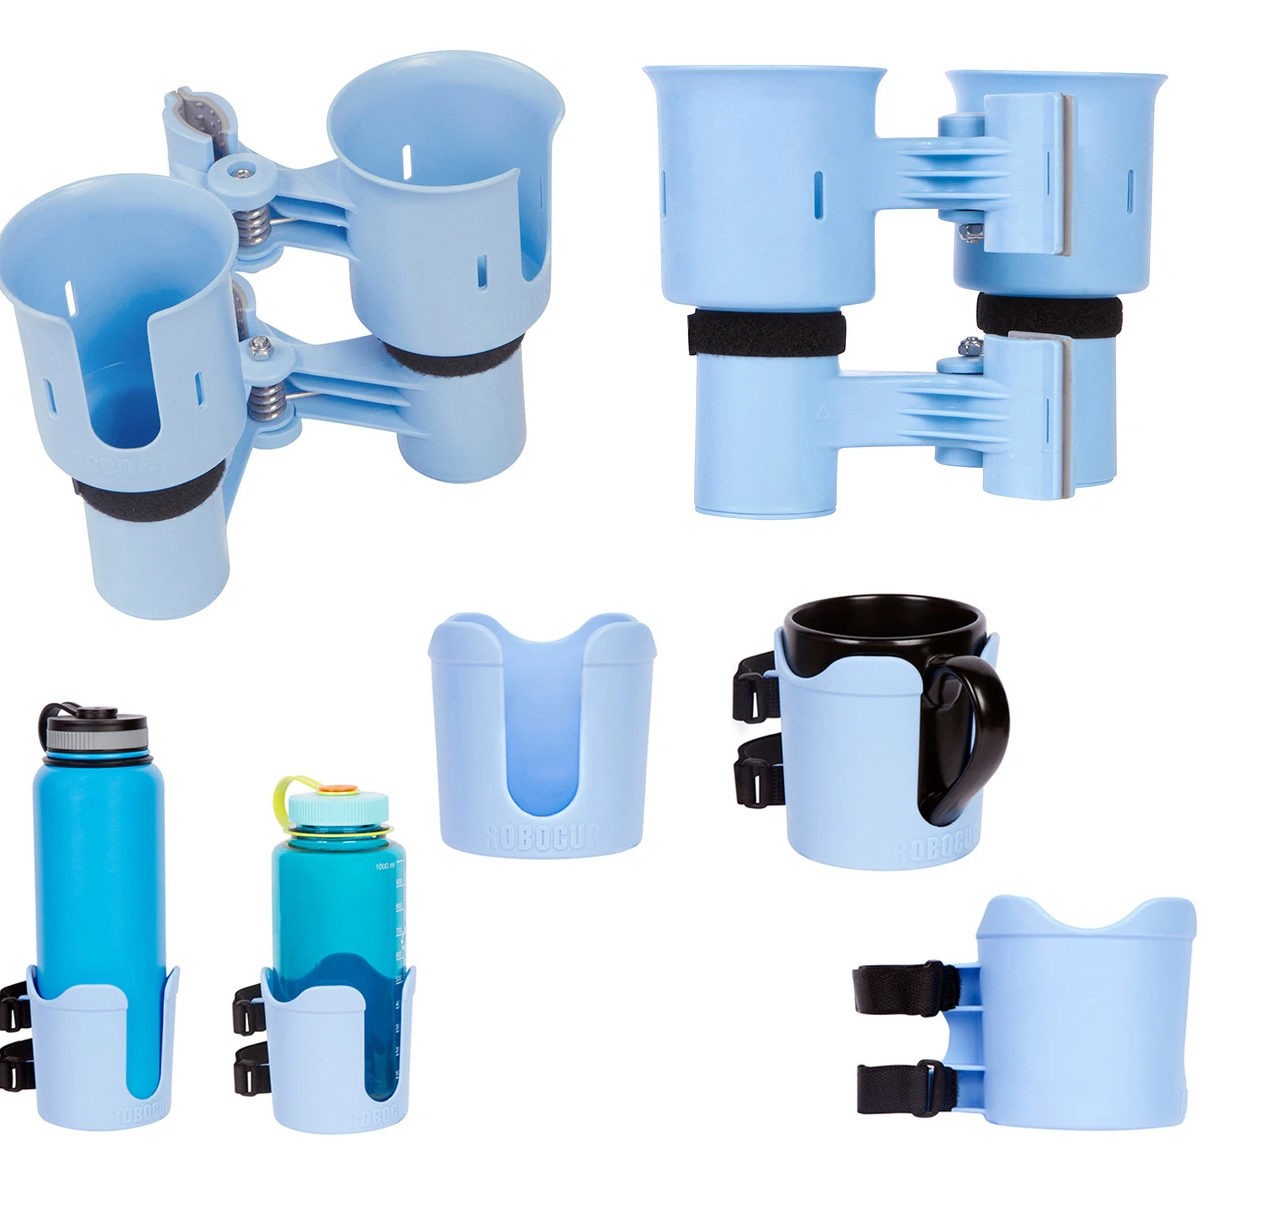 RoboCup Cup Holder + Plus Package Deal